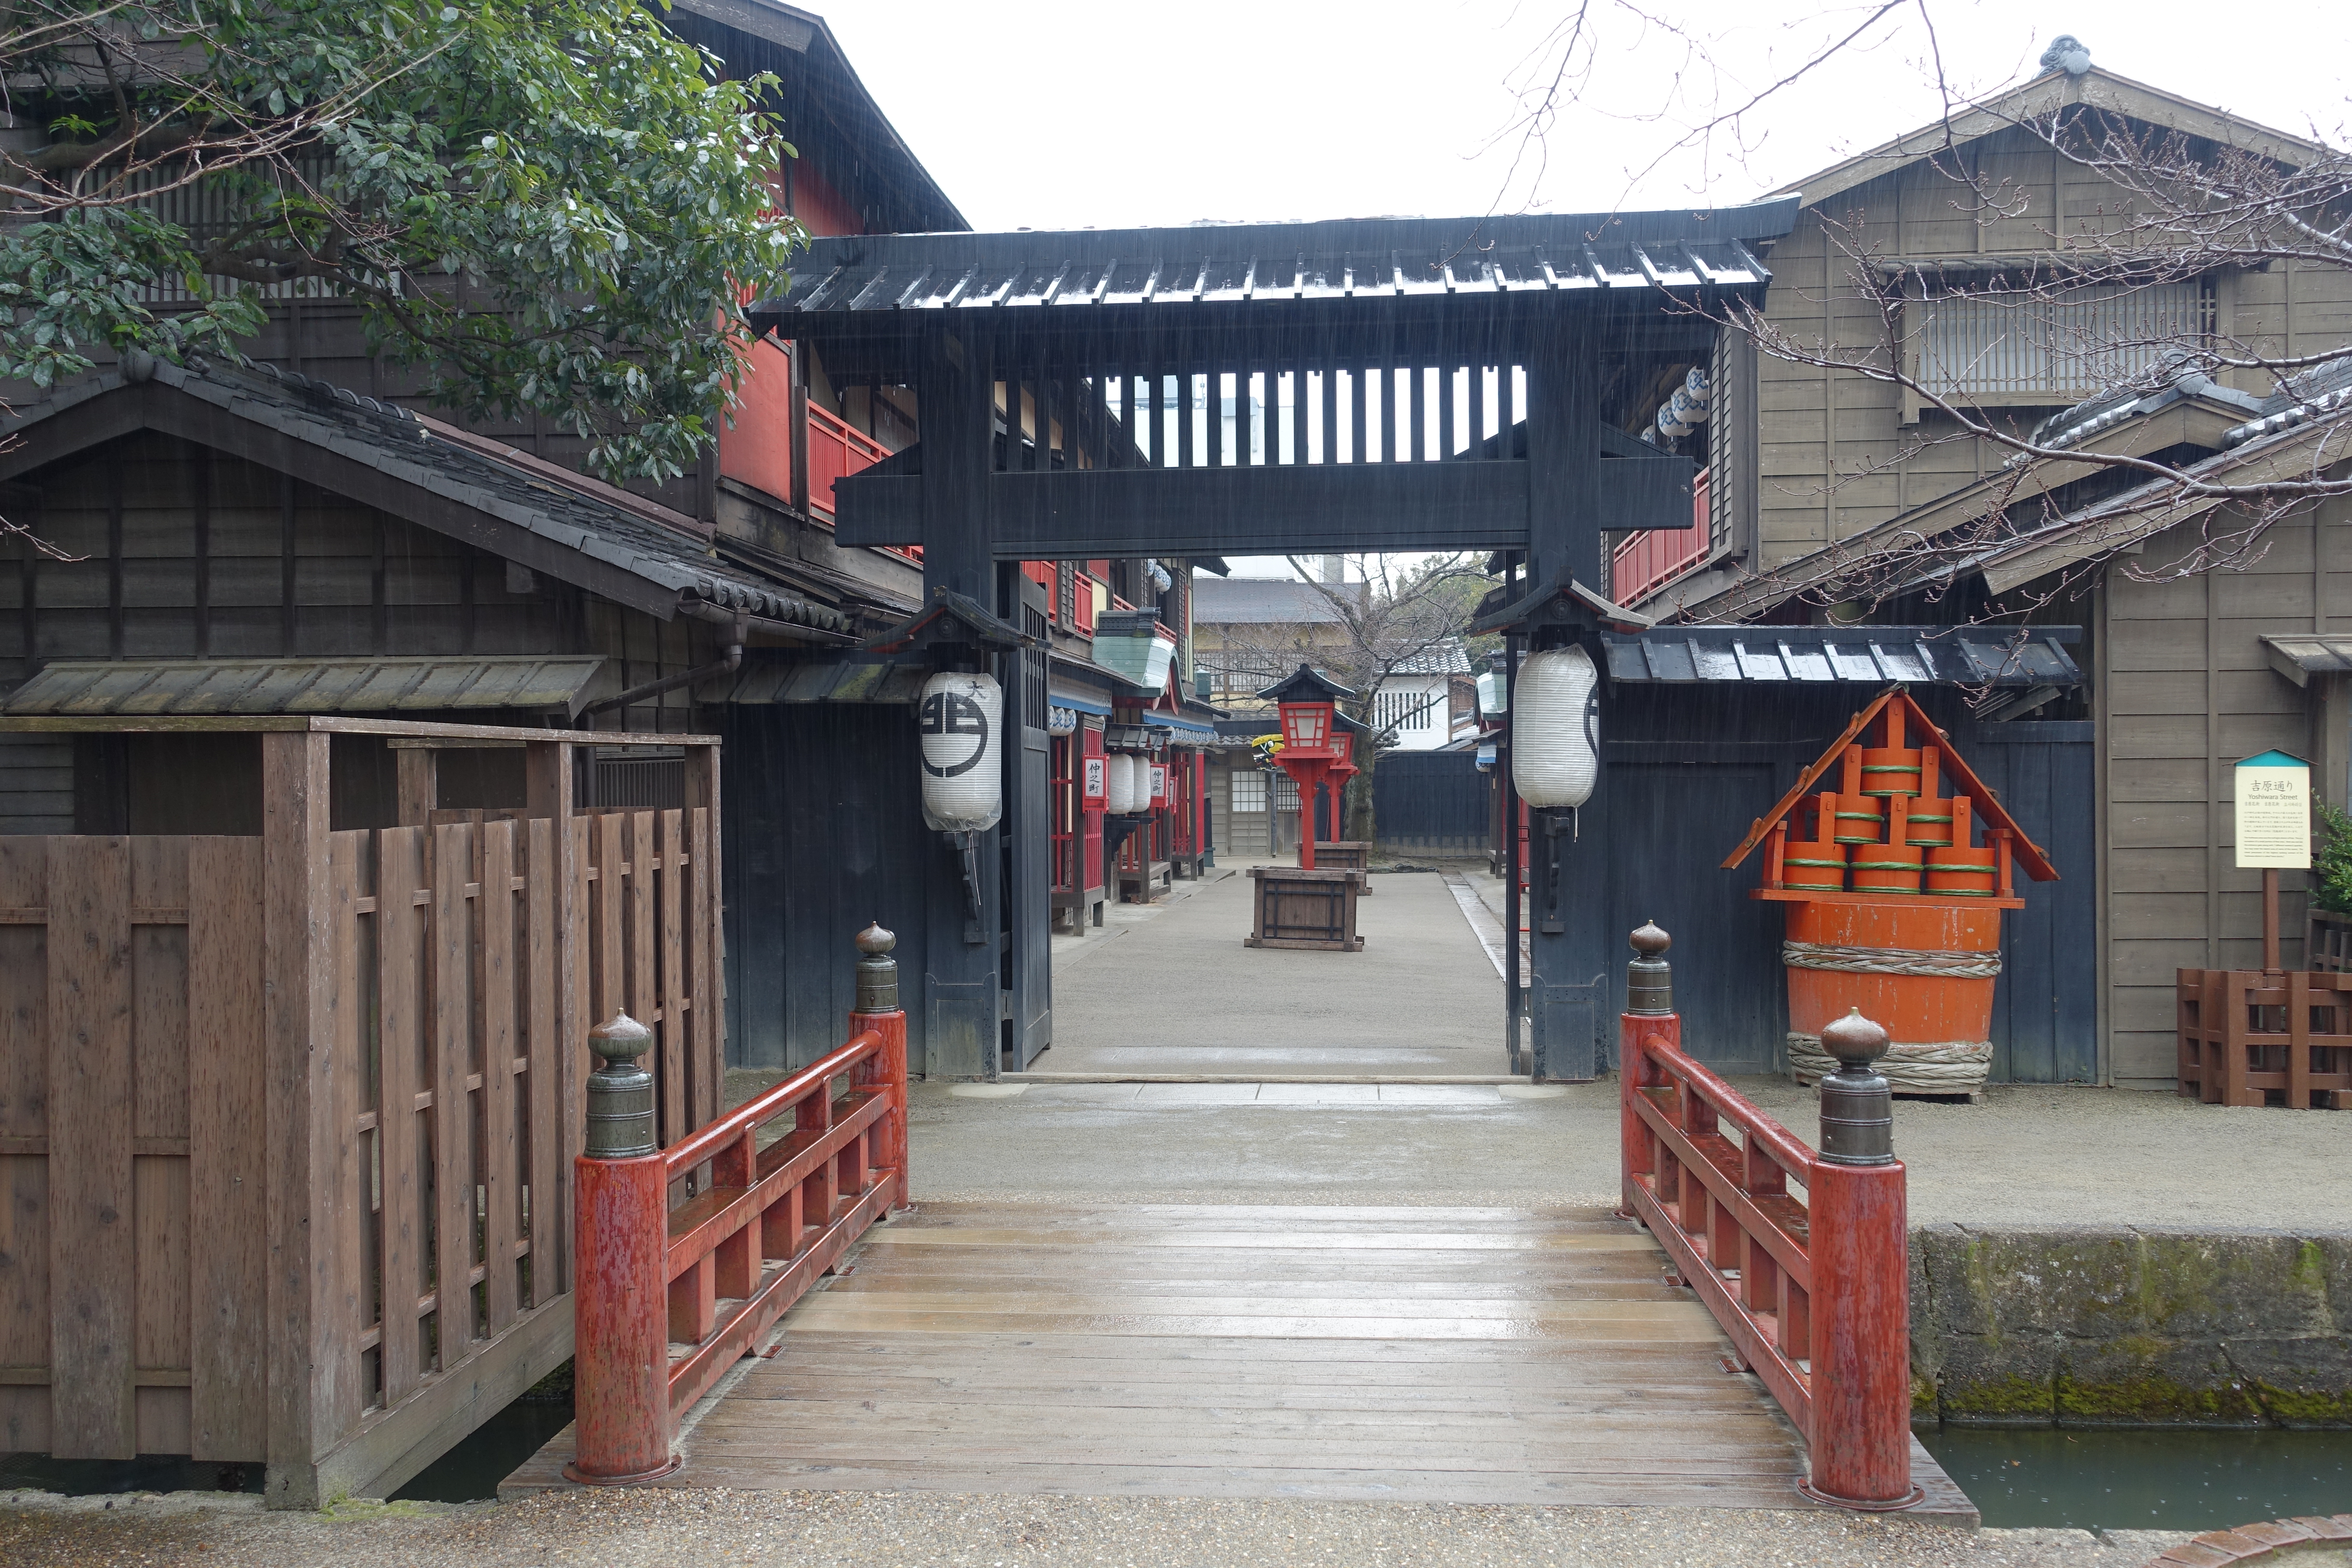 The park has collection of buildings from the Edo Period